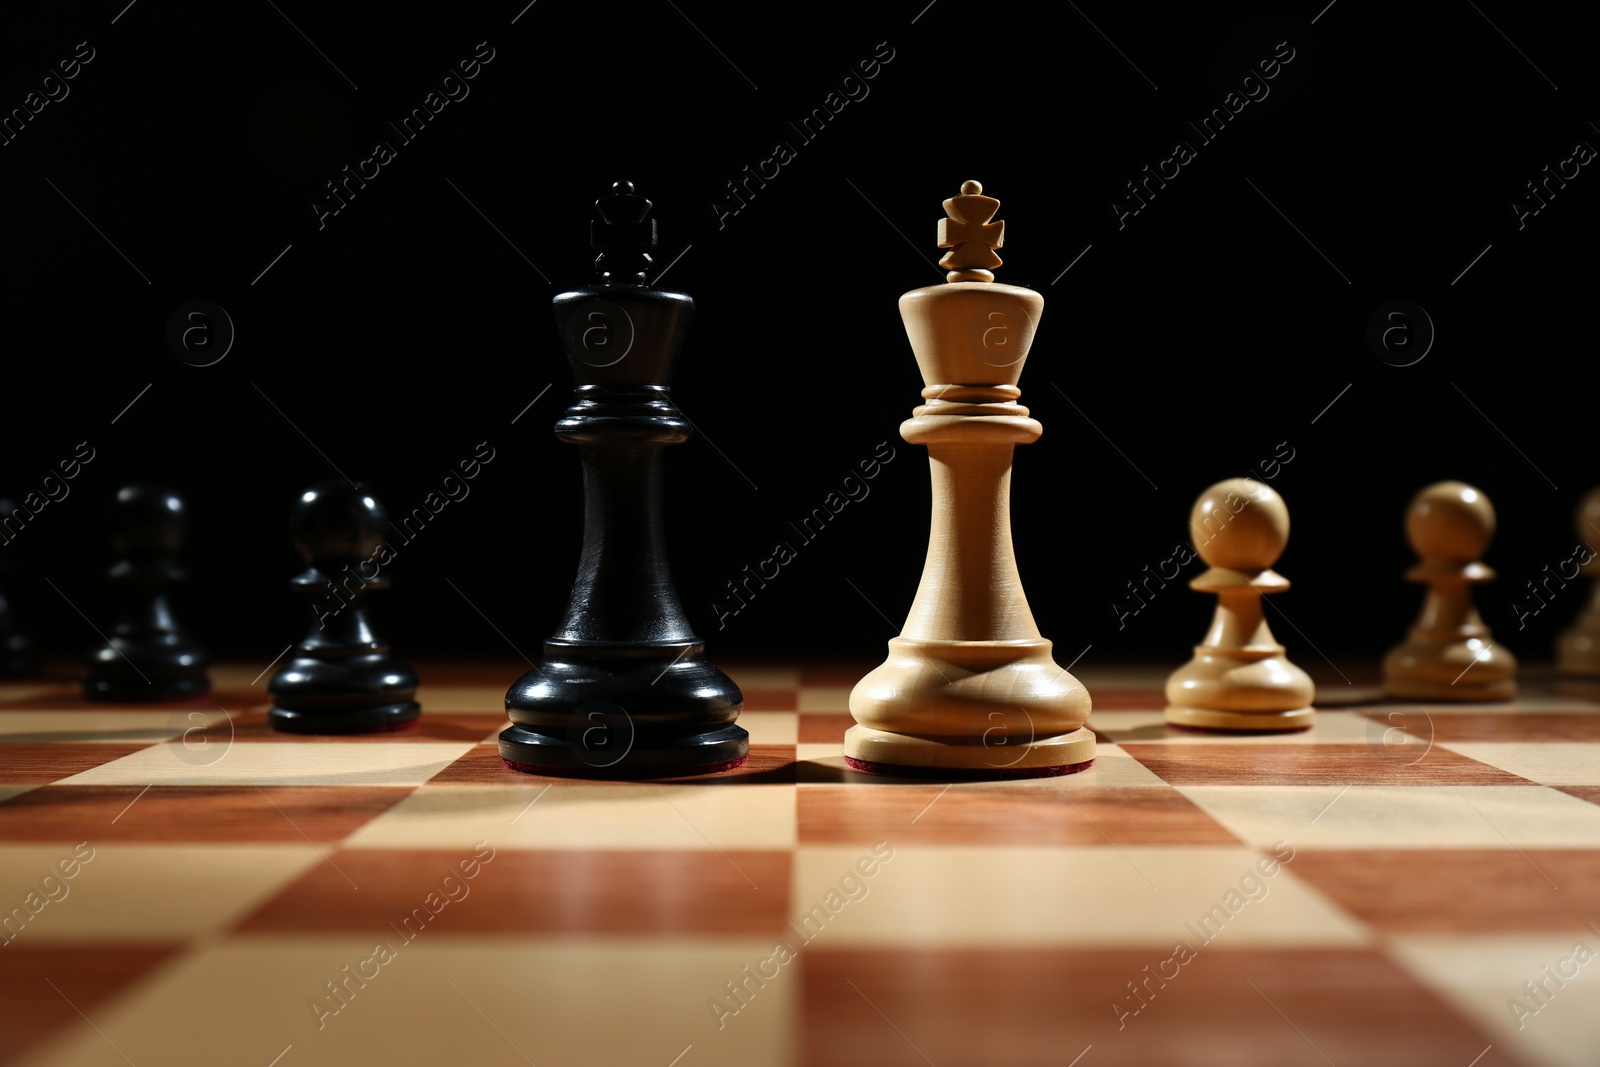 Photo of Kings with pawns on wooden chess board against black background